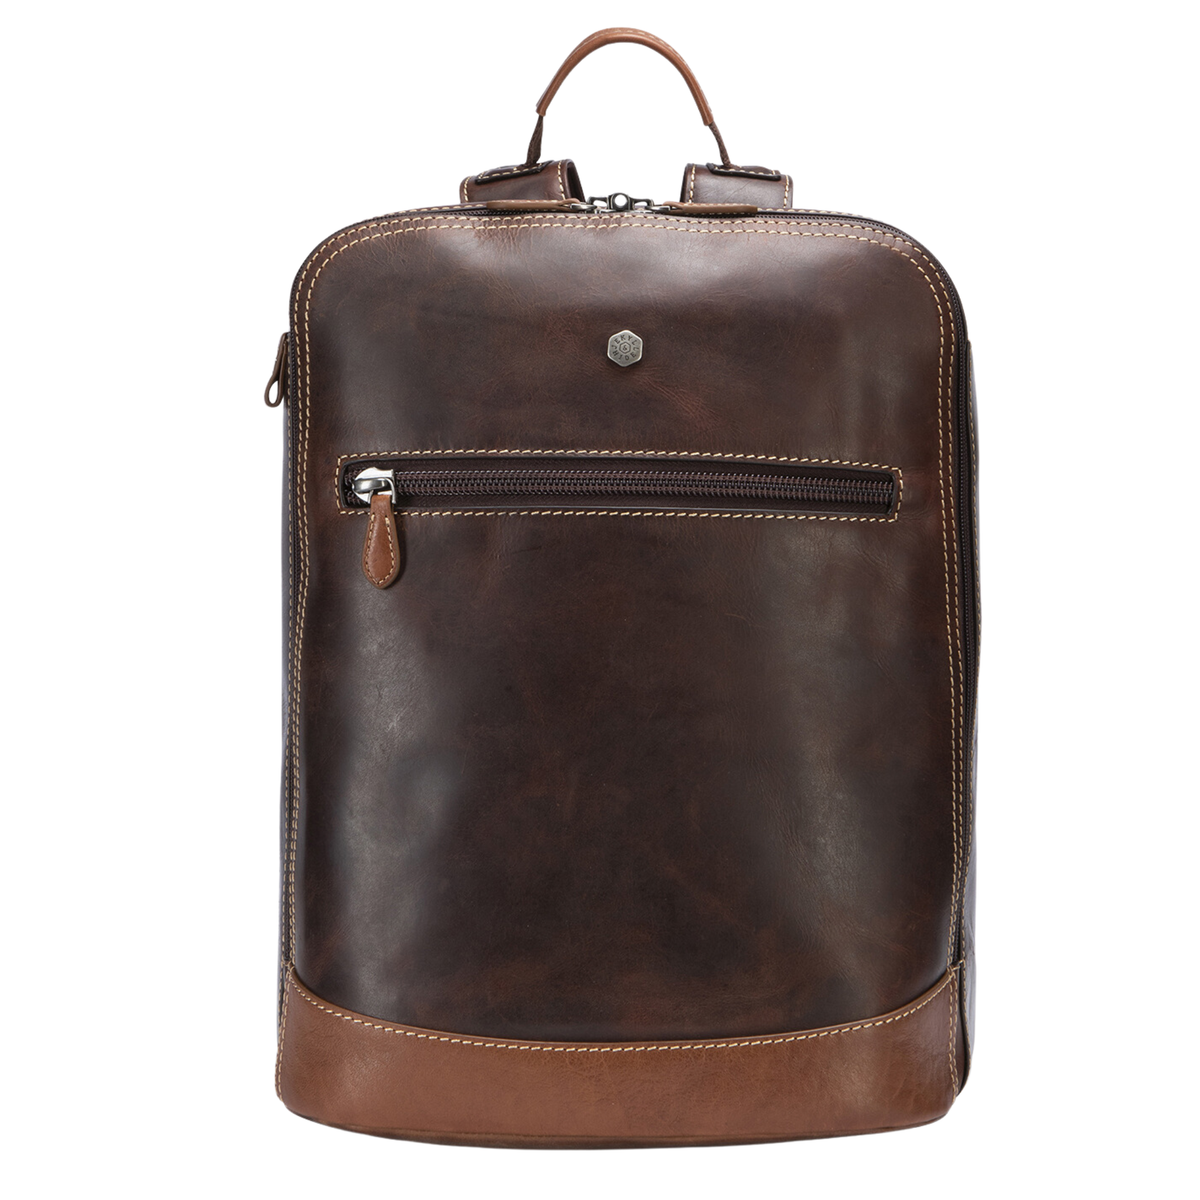 JEKYLL & HIDE DOUBLE COMPARTMENT BACKPACK- SOHO TWO TONE